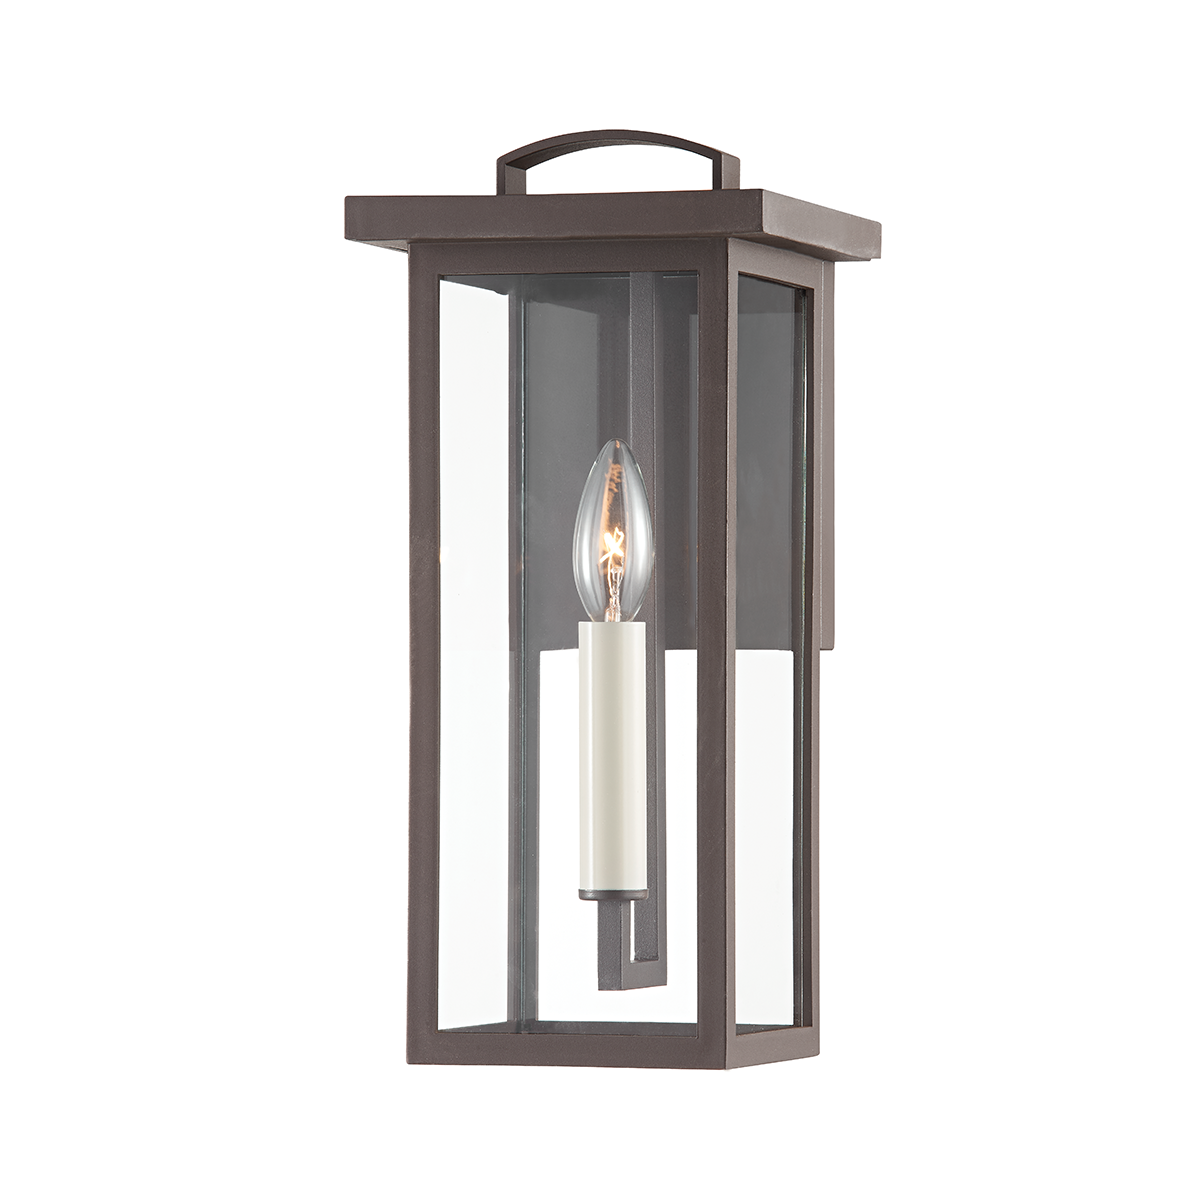 Troy Lighting 1 LIGHT SMALL EXTERIOR WALL SCONCE B7521 Outdoor l Wall Troy Lighting TEXTURED BRONZE  